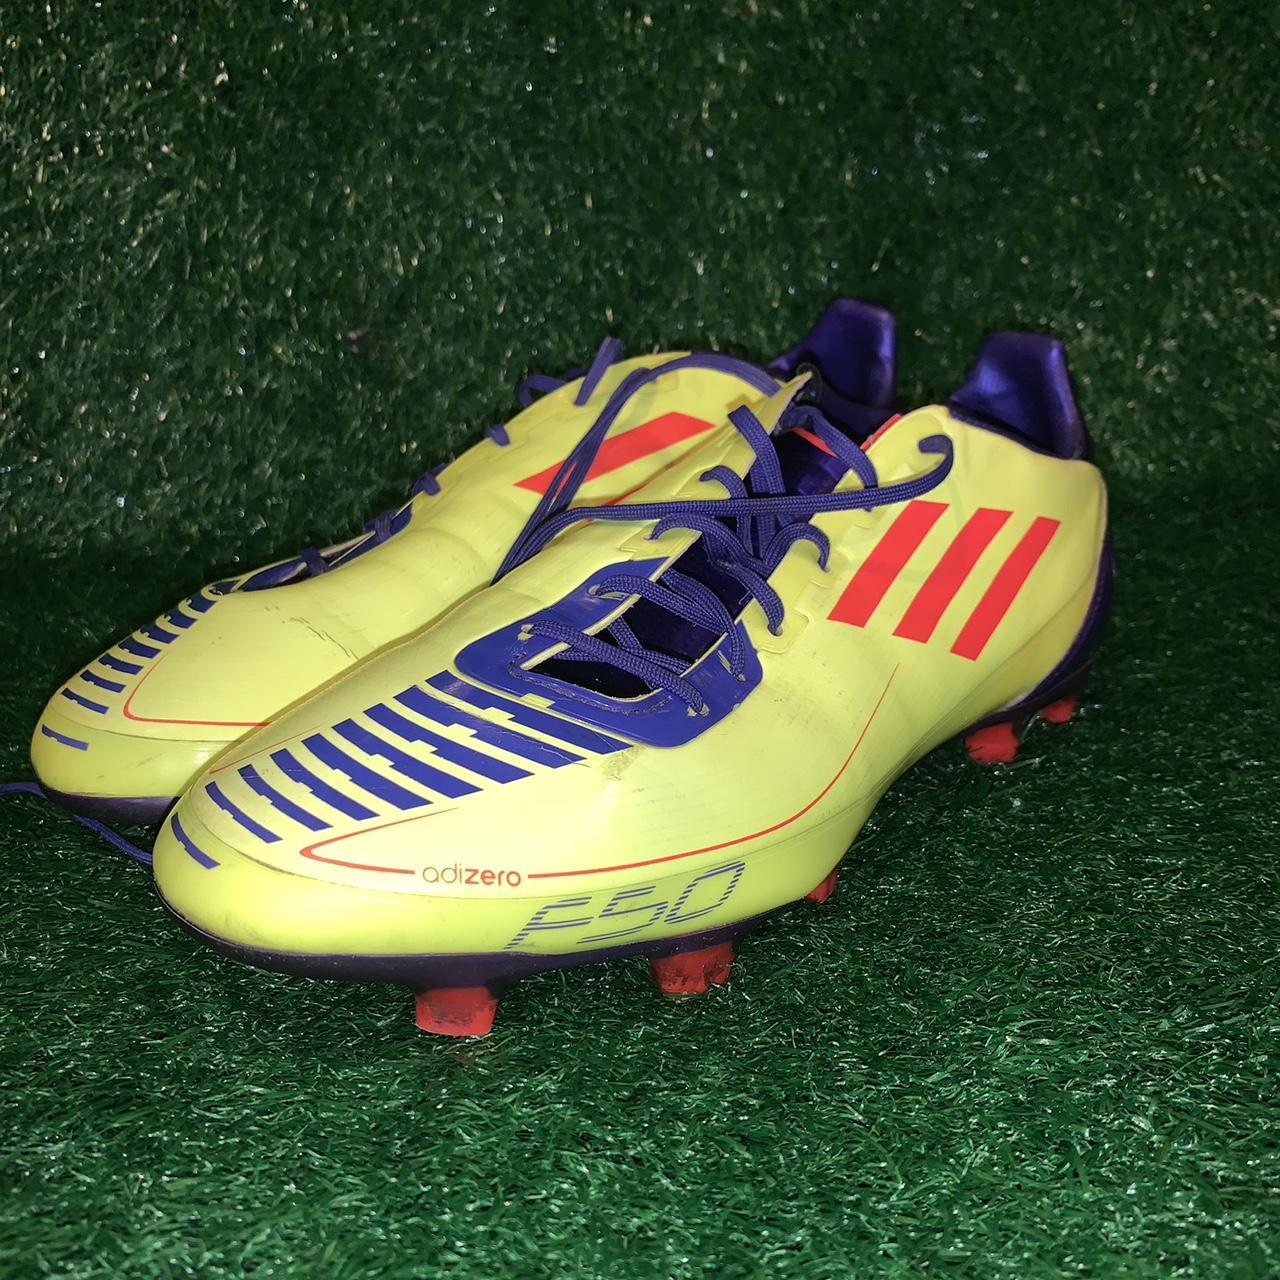 Adidas Men's Yellow and Purple Boots